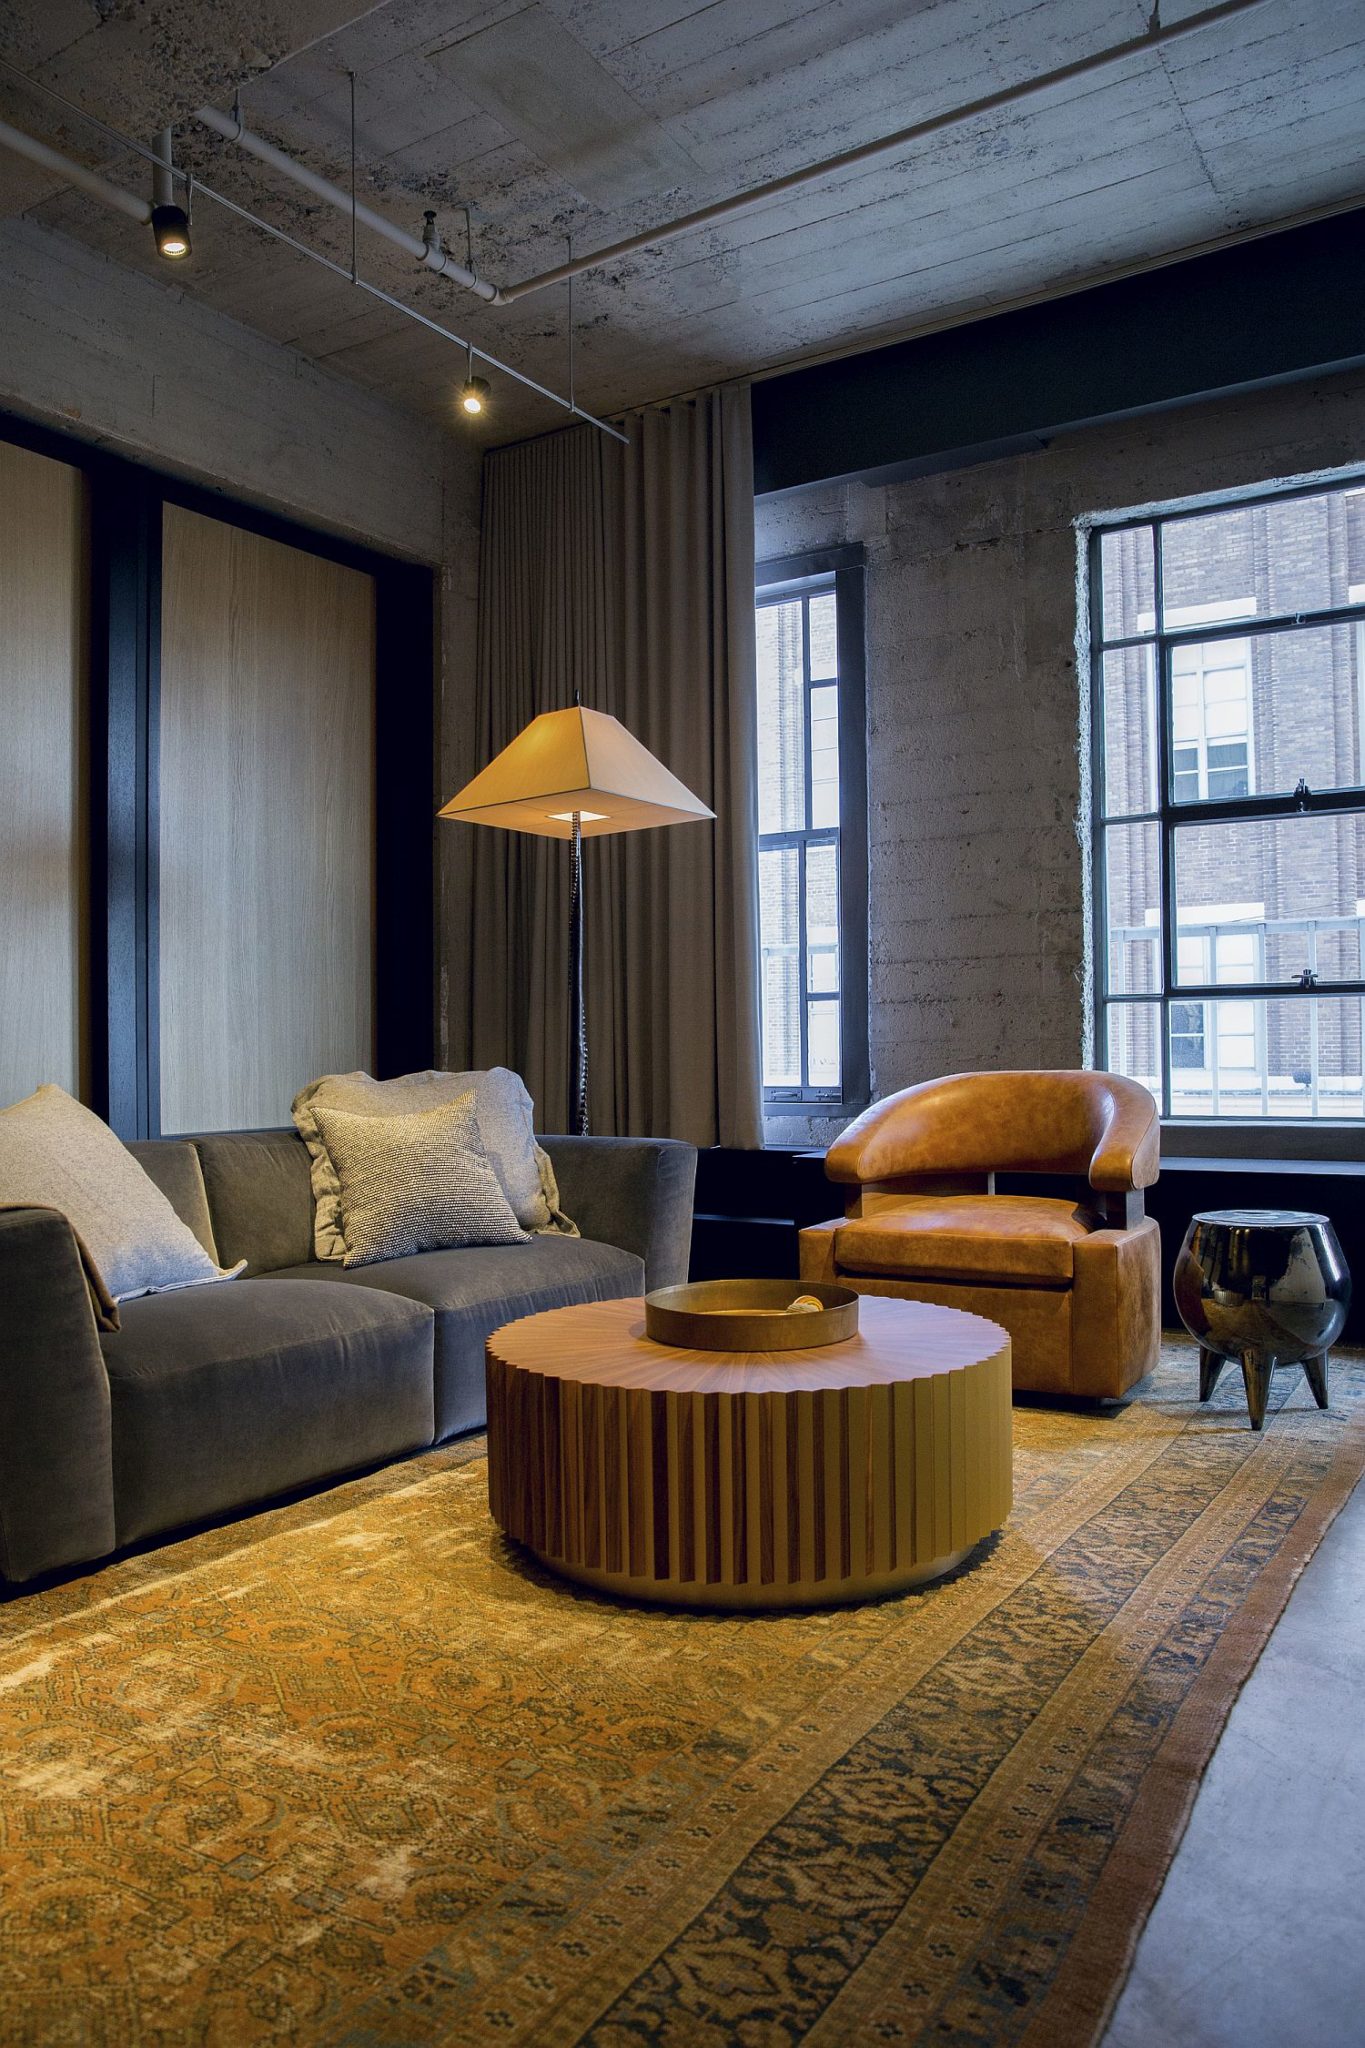 Gorgeous use of carpet and floor lamp brings a dash of yellow to the steely, industrial loft